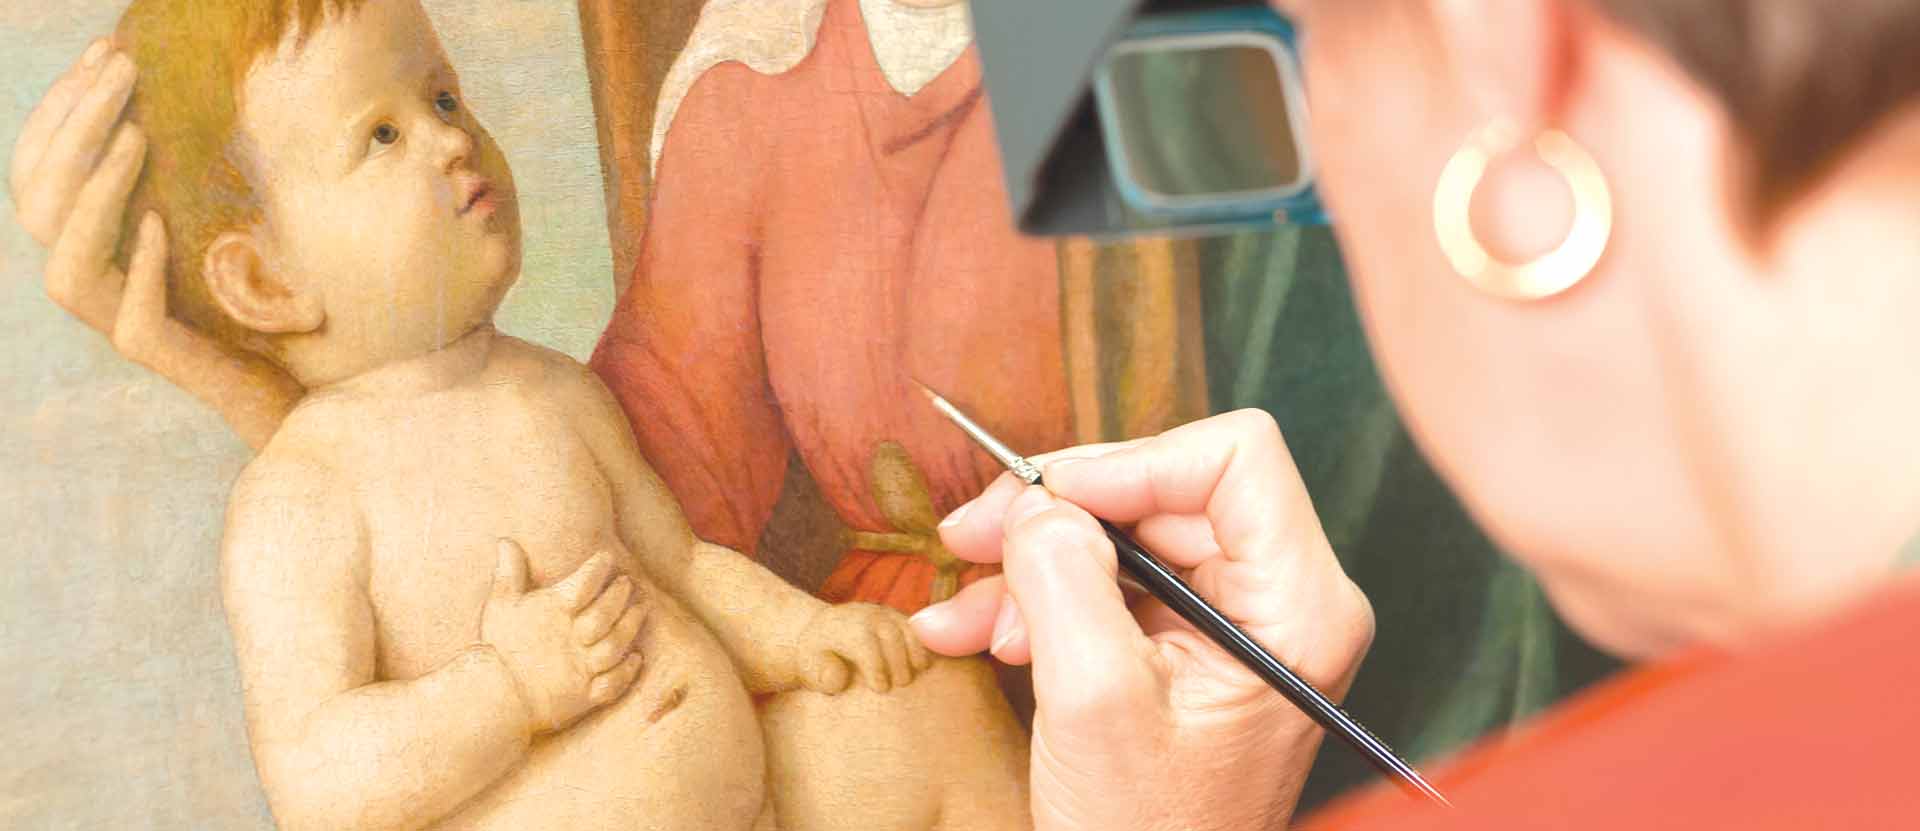 Woman repairing painting of baby with very small paintbrush.